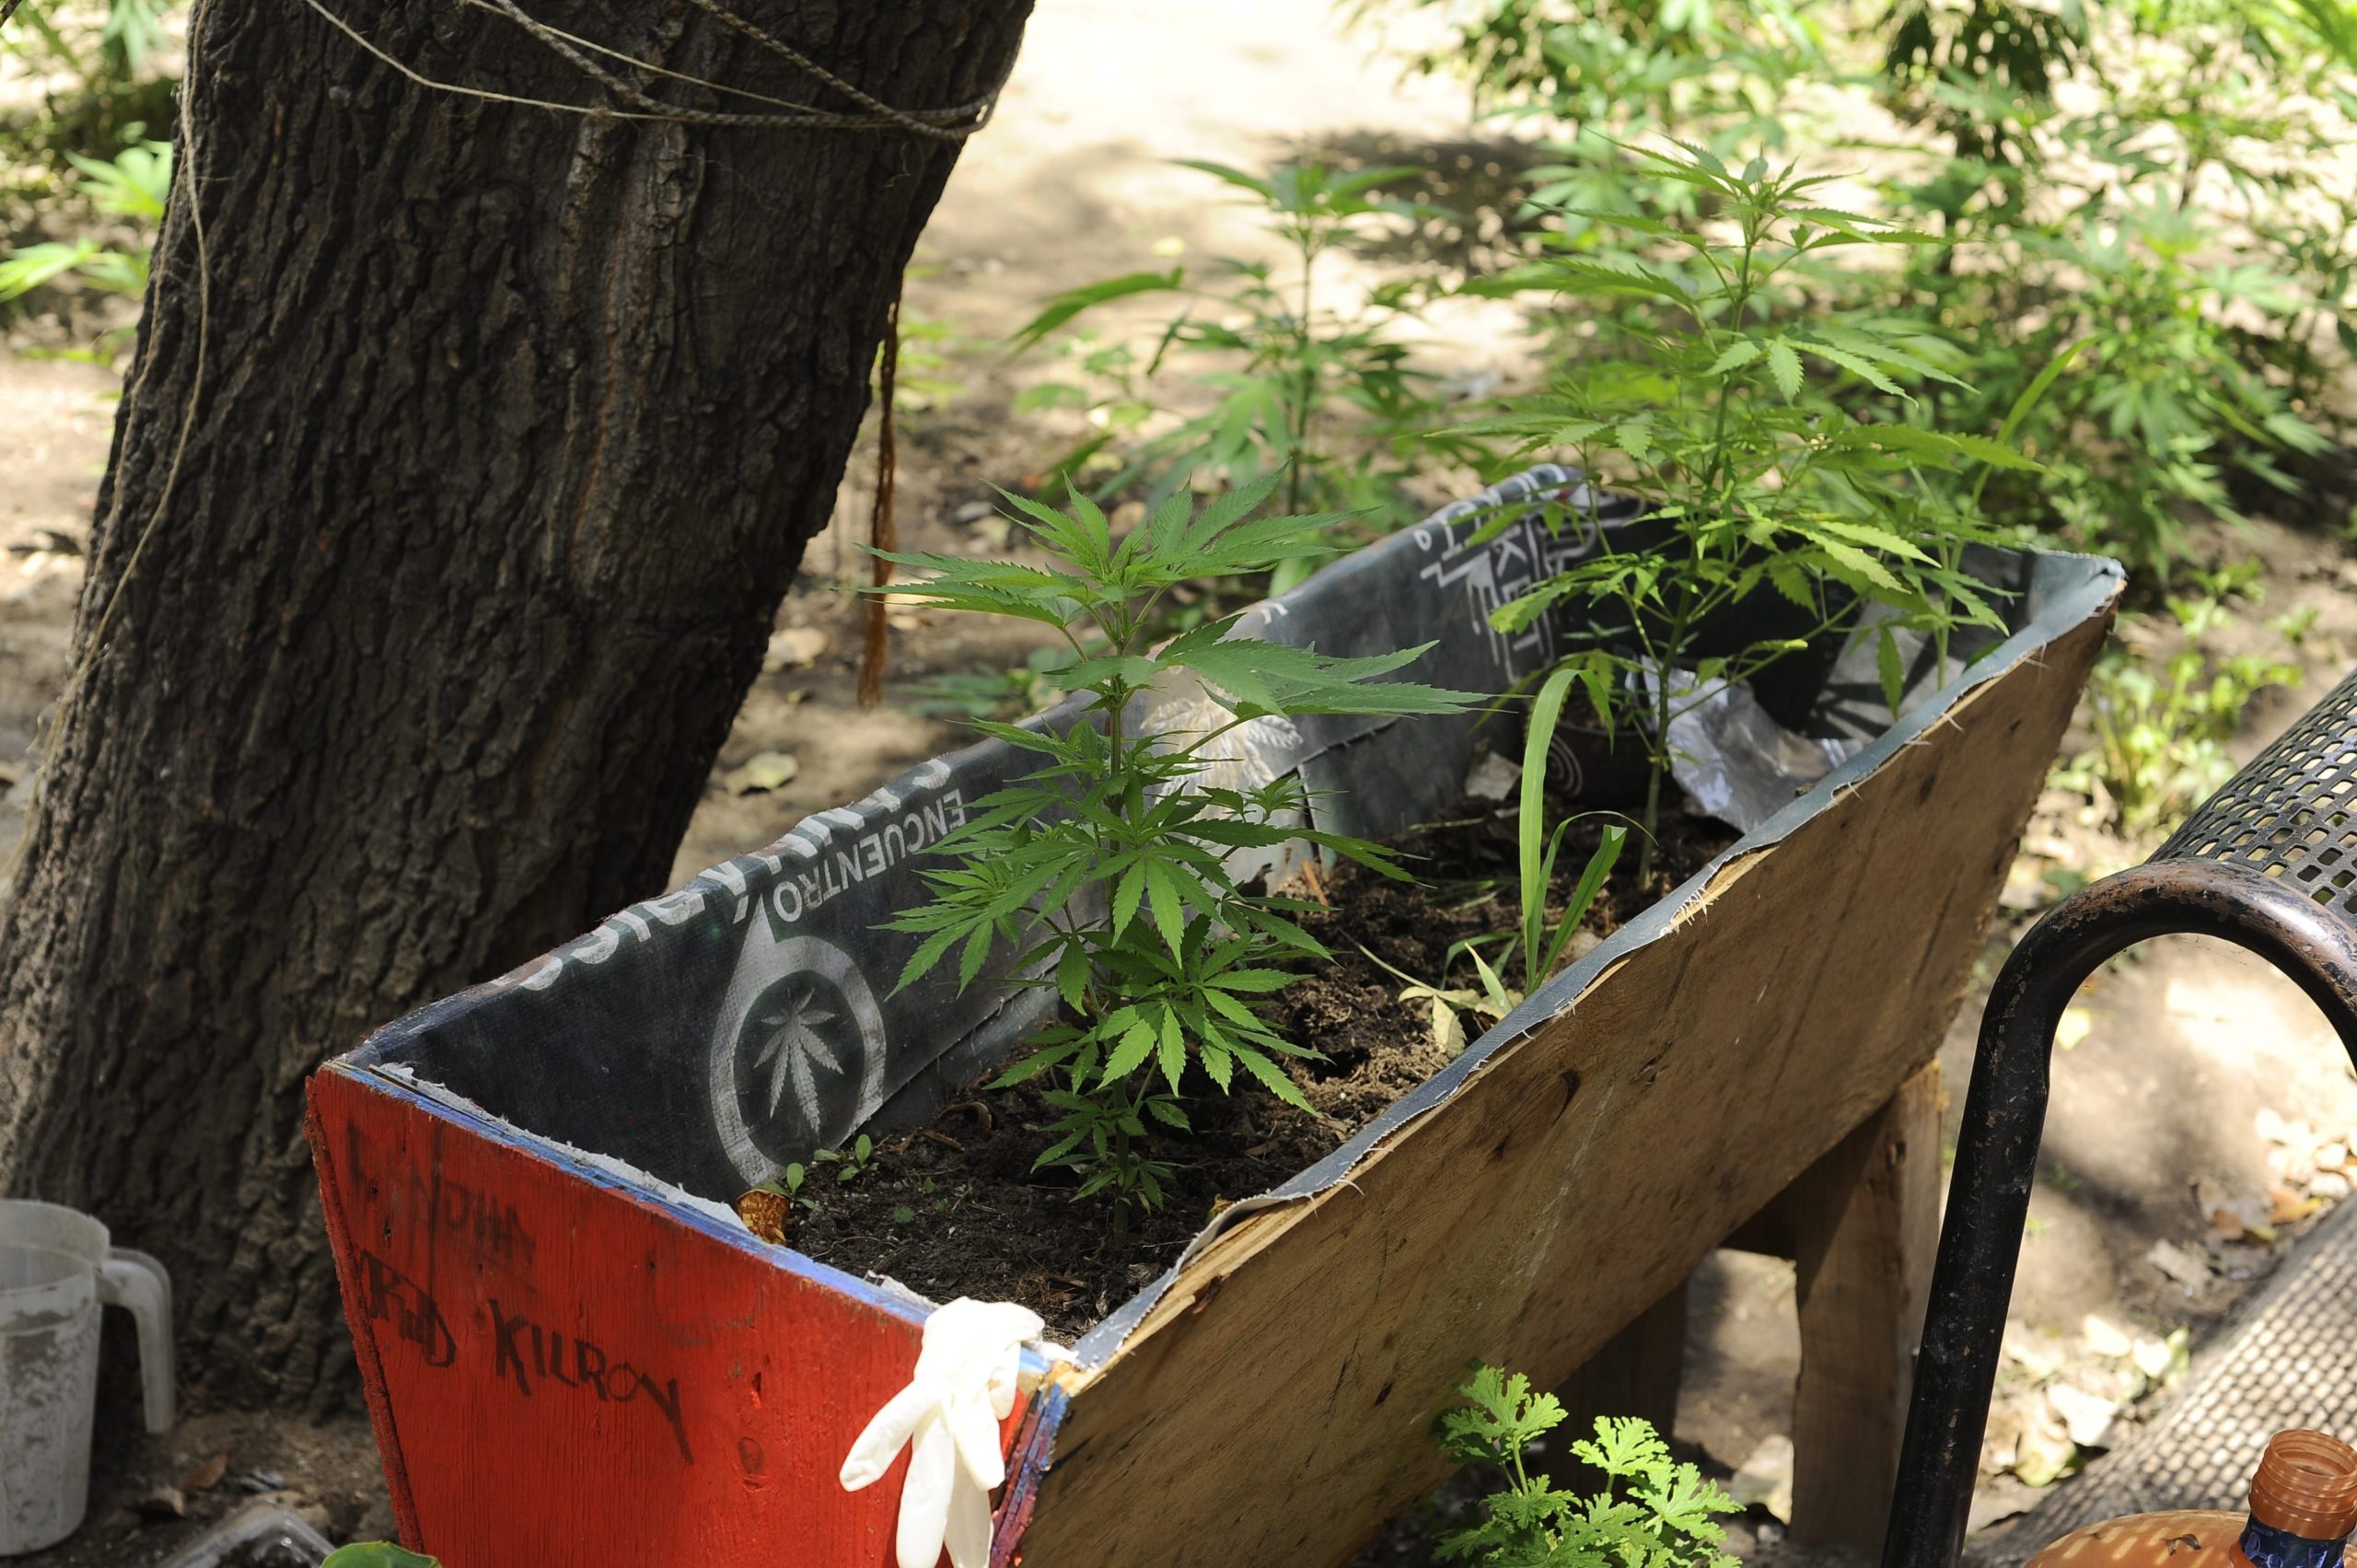 A Weed Startup Is Building a Weed Farm in the City of Weed, California